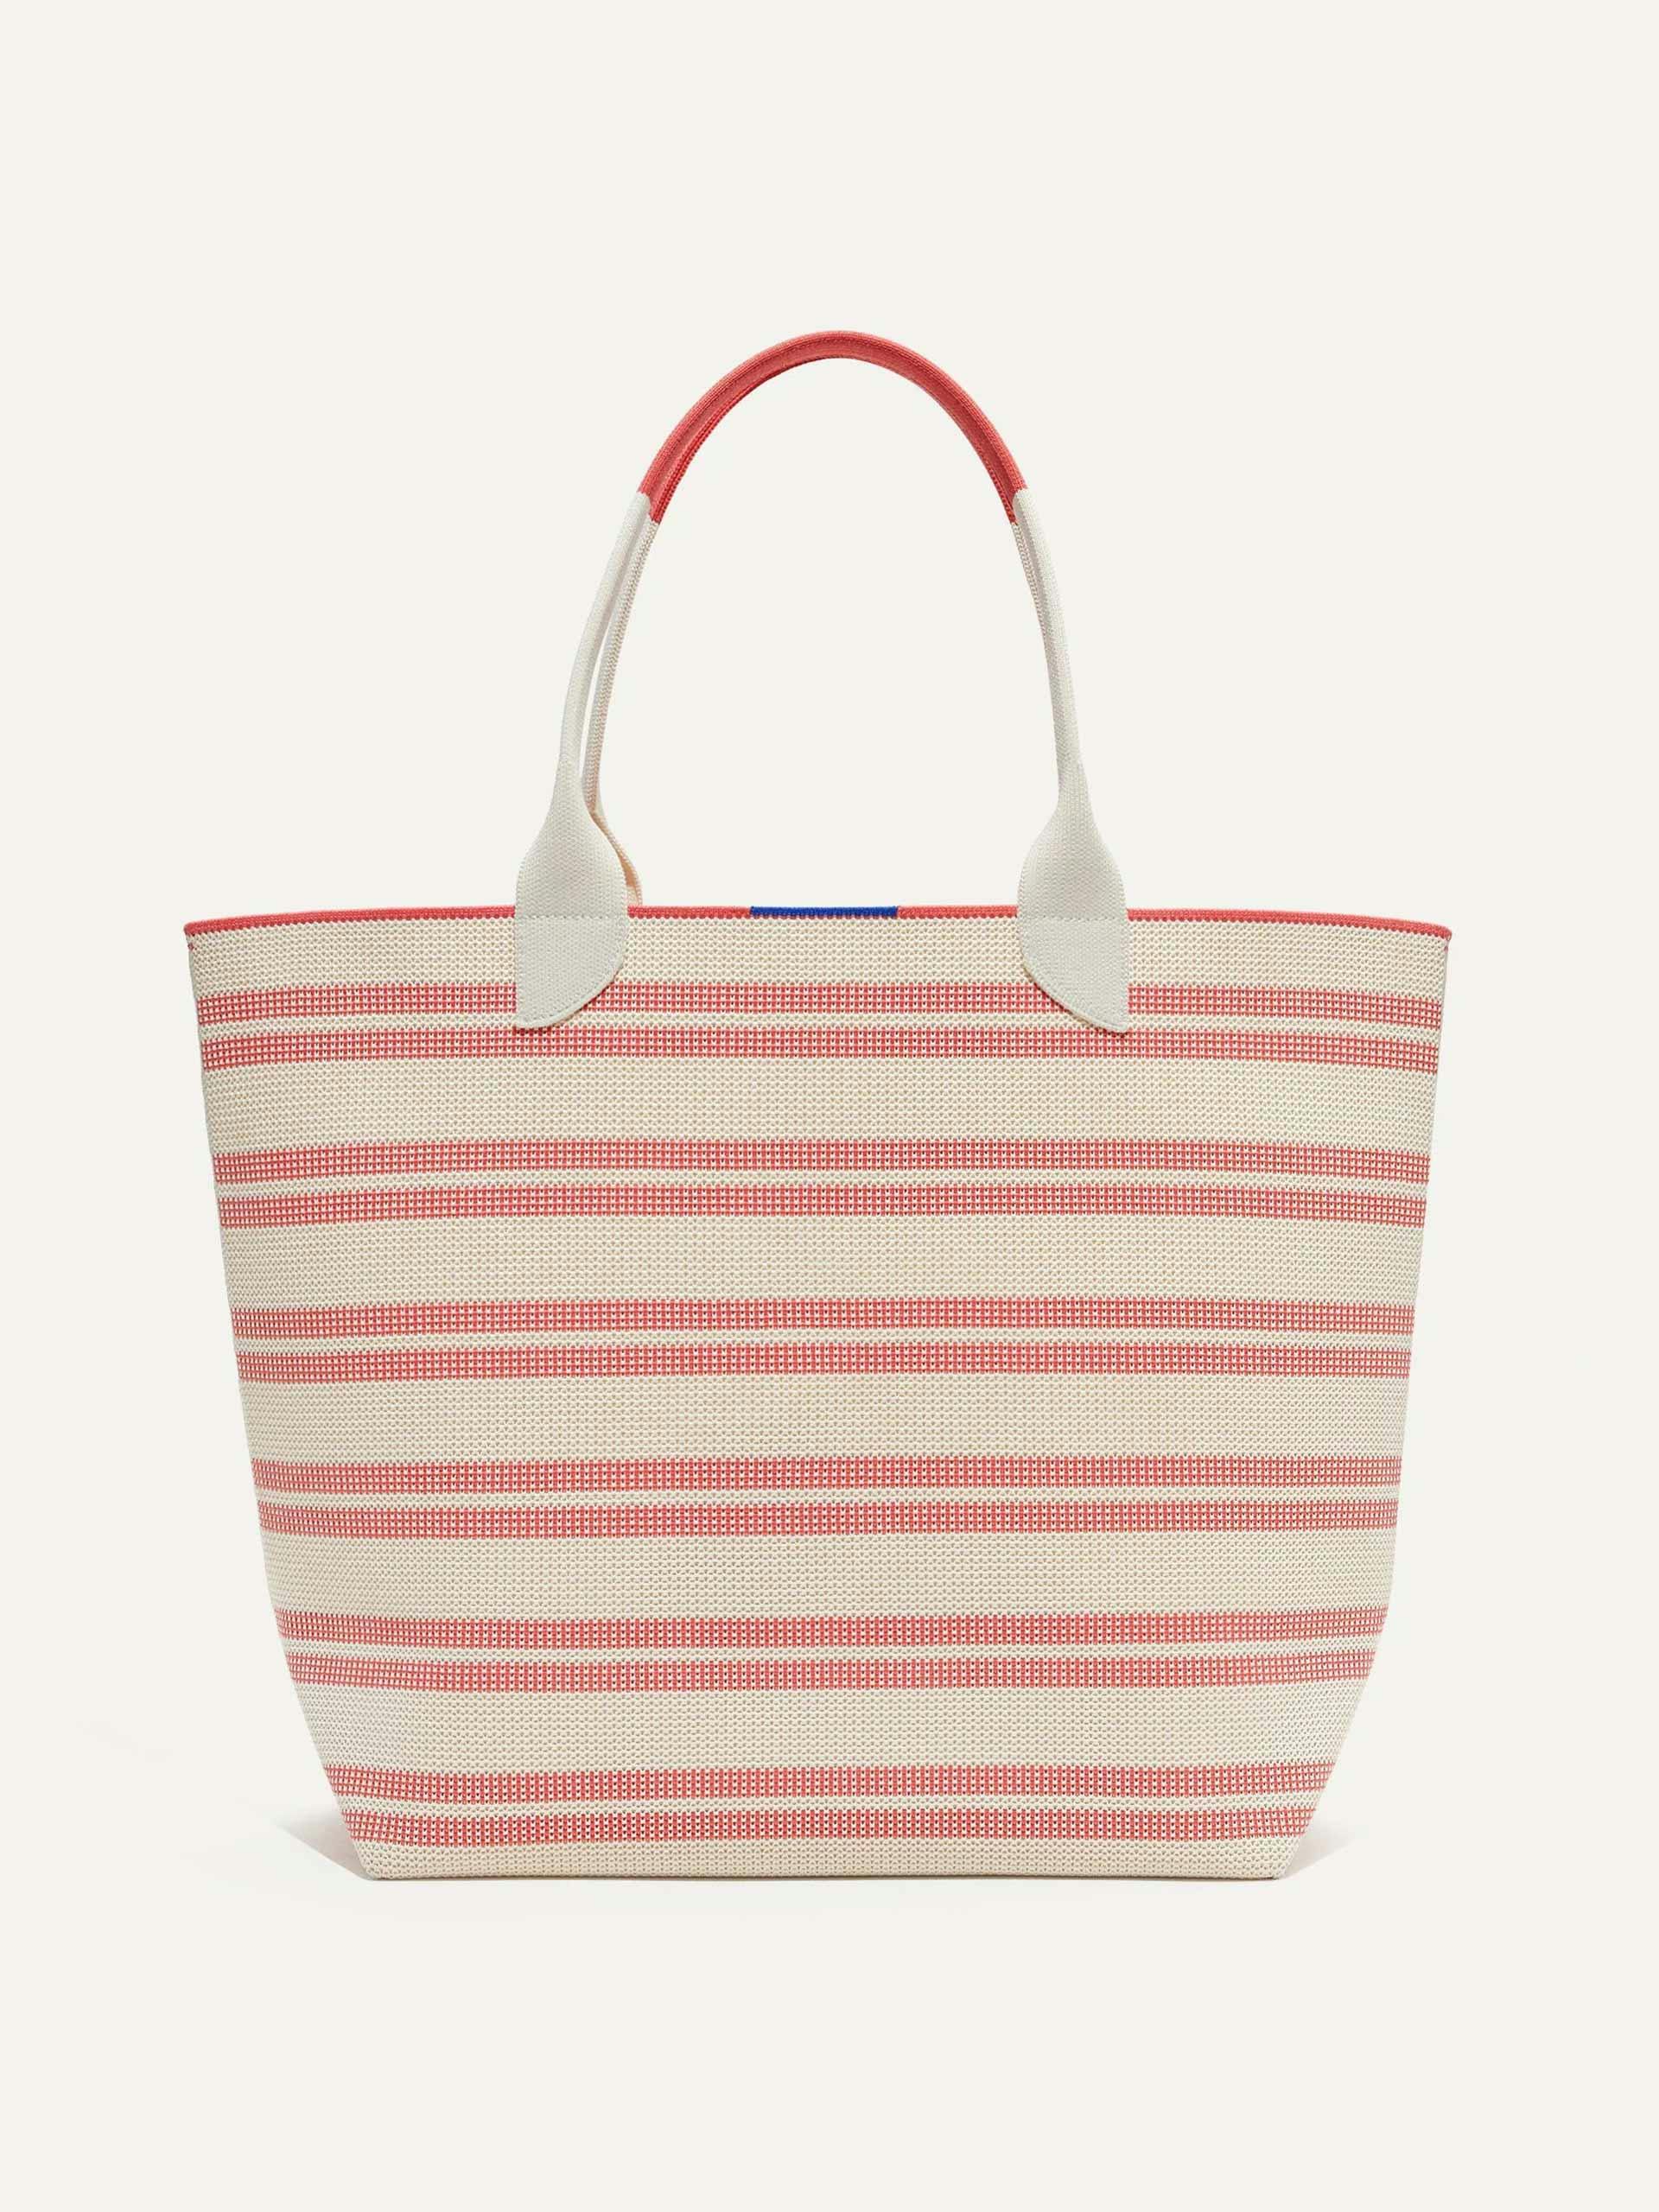 The Lightweight tote bag